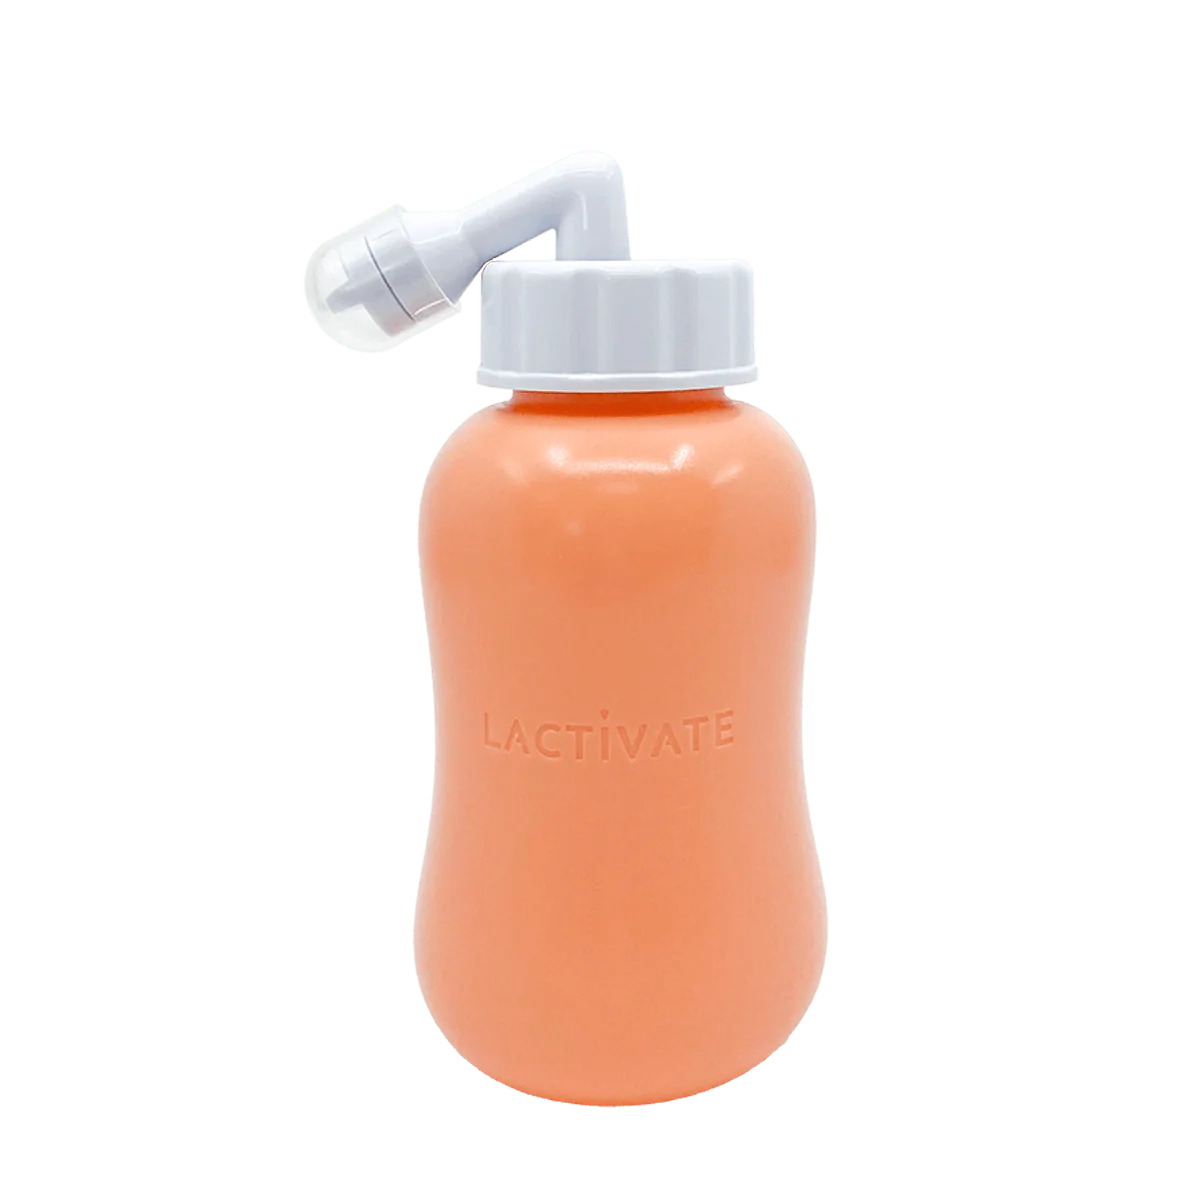 Lactivate Peri Bottle - Tiny Tots Baby Store 